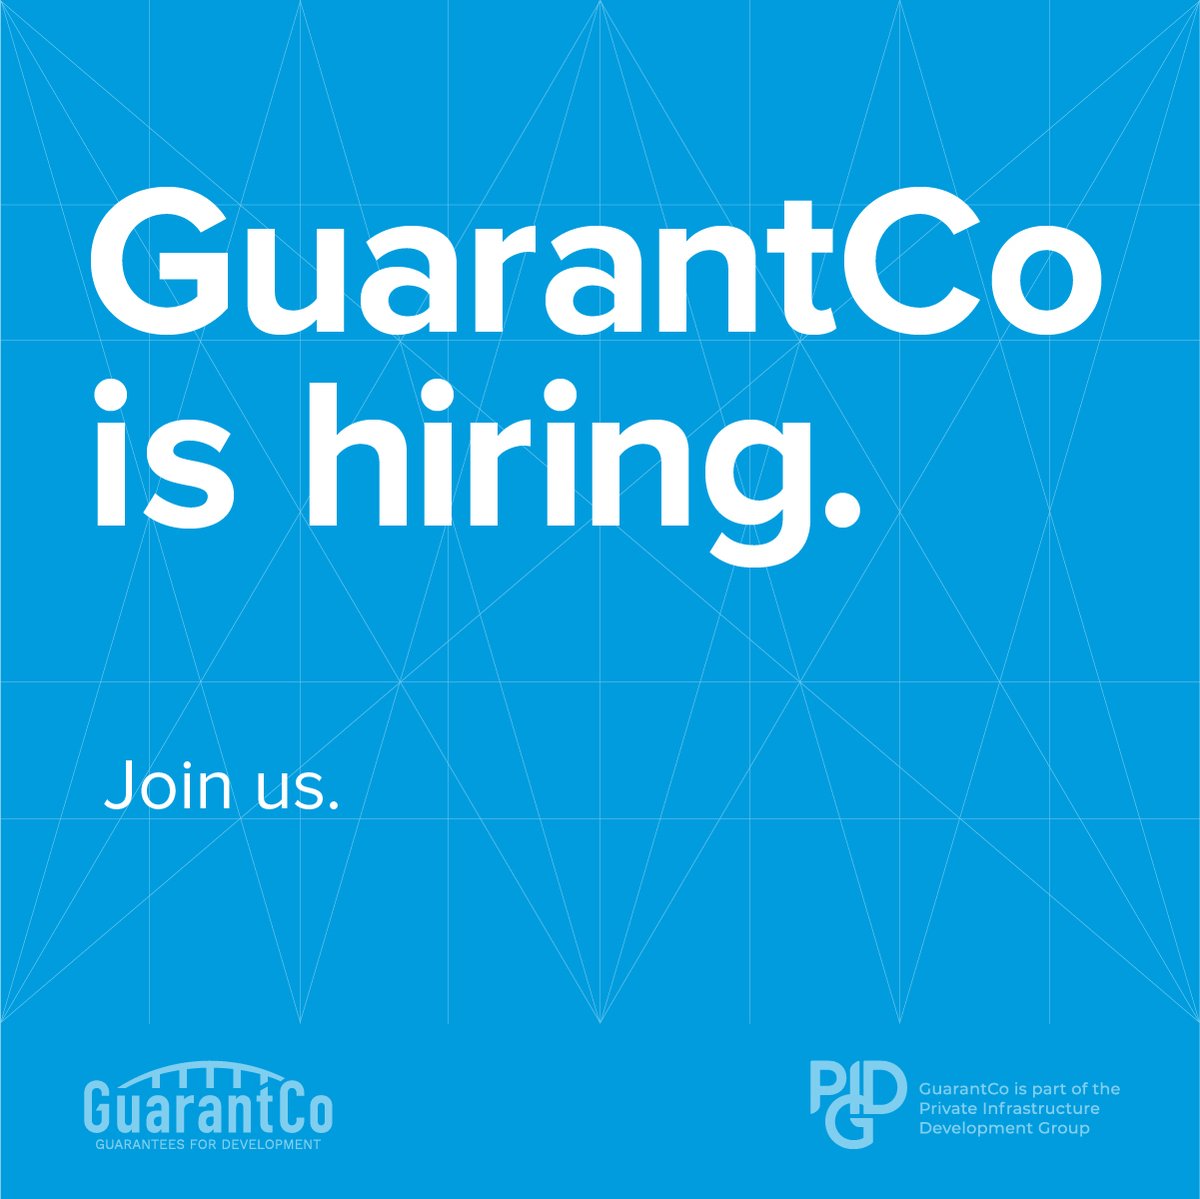 Looking for a new opportunity to make a difference and work in an entrepreneurial and innovative environment? @GuarantCo, part of @PIDGorg, is looking for a Loan Administration Officer based in London. To apply, please visit lnkd.in/dE69b_e7 by 18th April 2024.